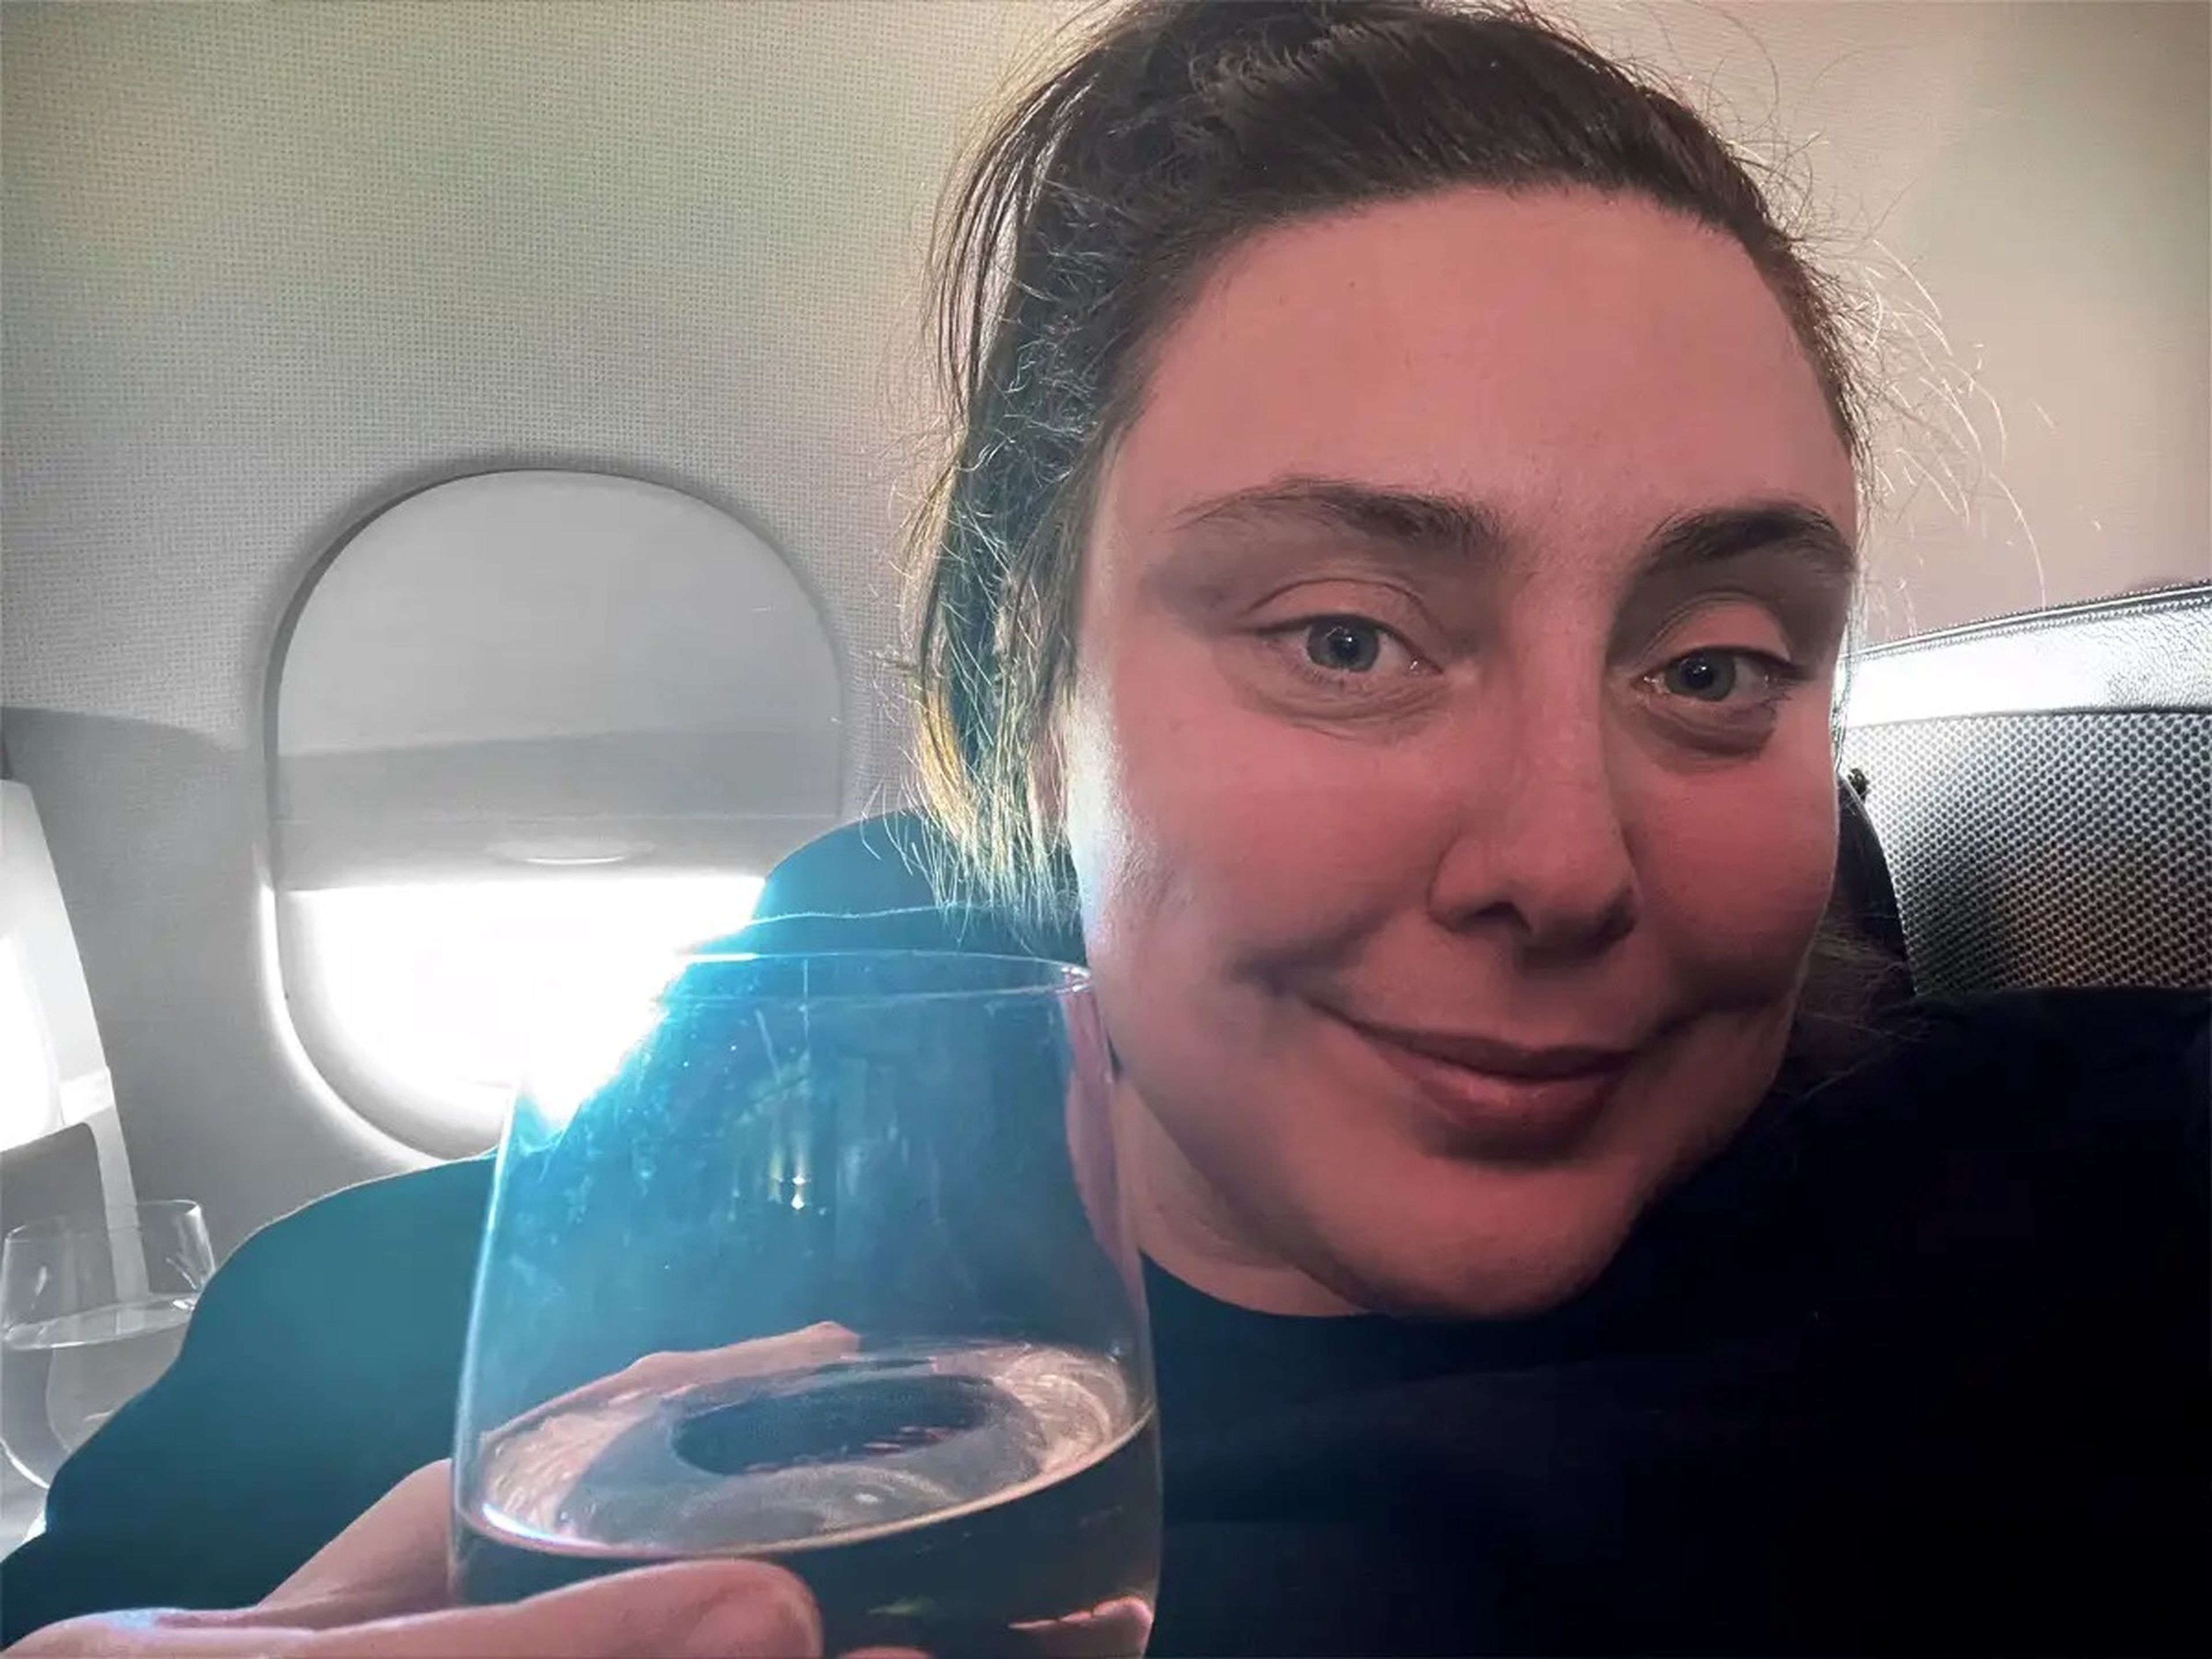 Selfie of the writer smiling, holding a glass of wine, and the airplane window with light shining through in the background